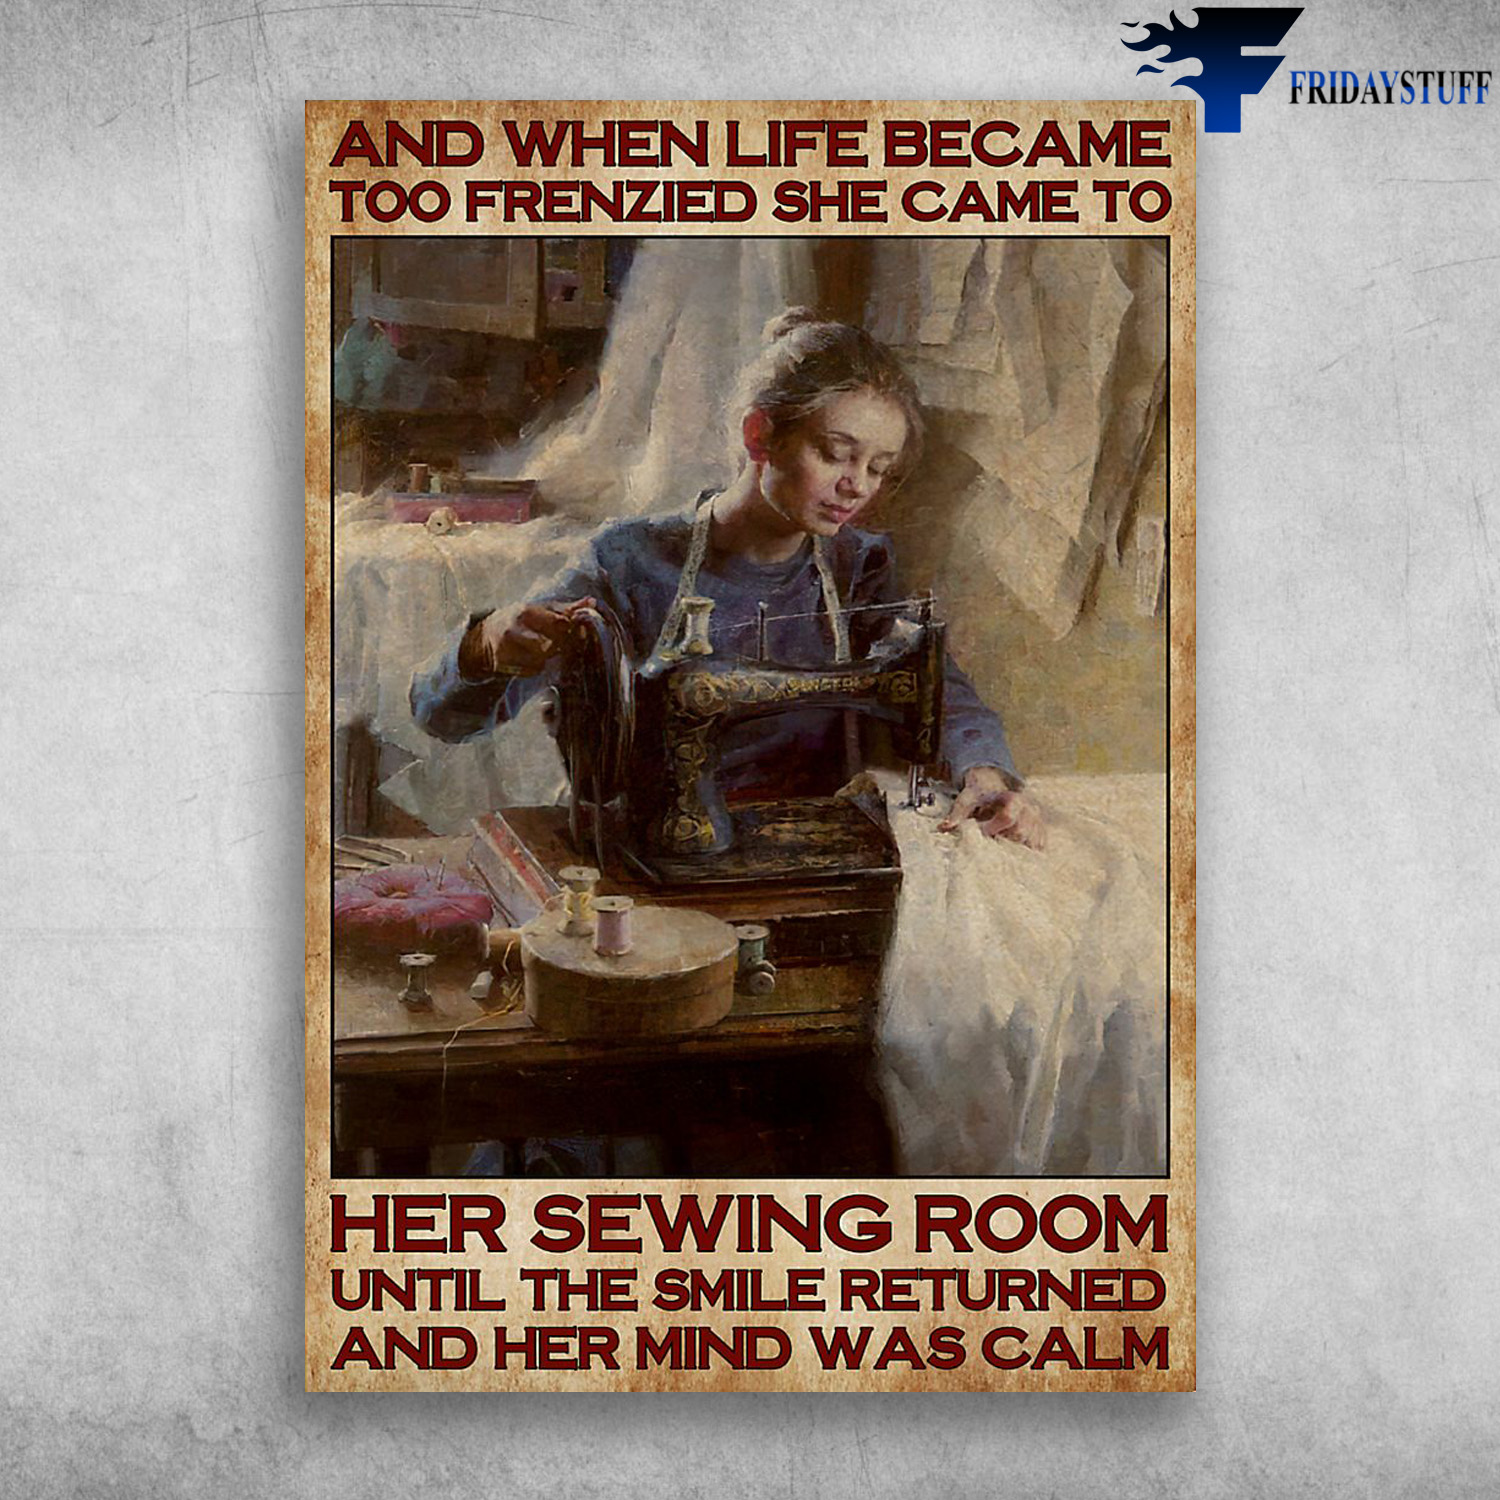 Girl Sewing - And When Life Become Too Frenzied, She Came To Her Sewing Room, Until The Smile Returned, And Her Mind Was Calm